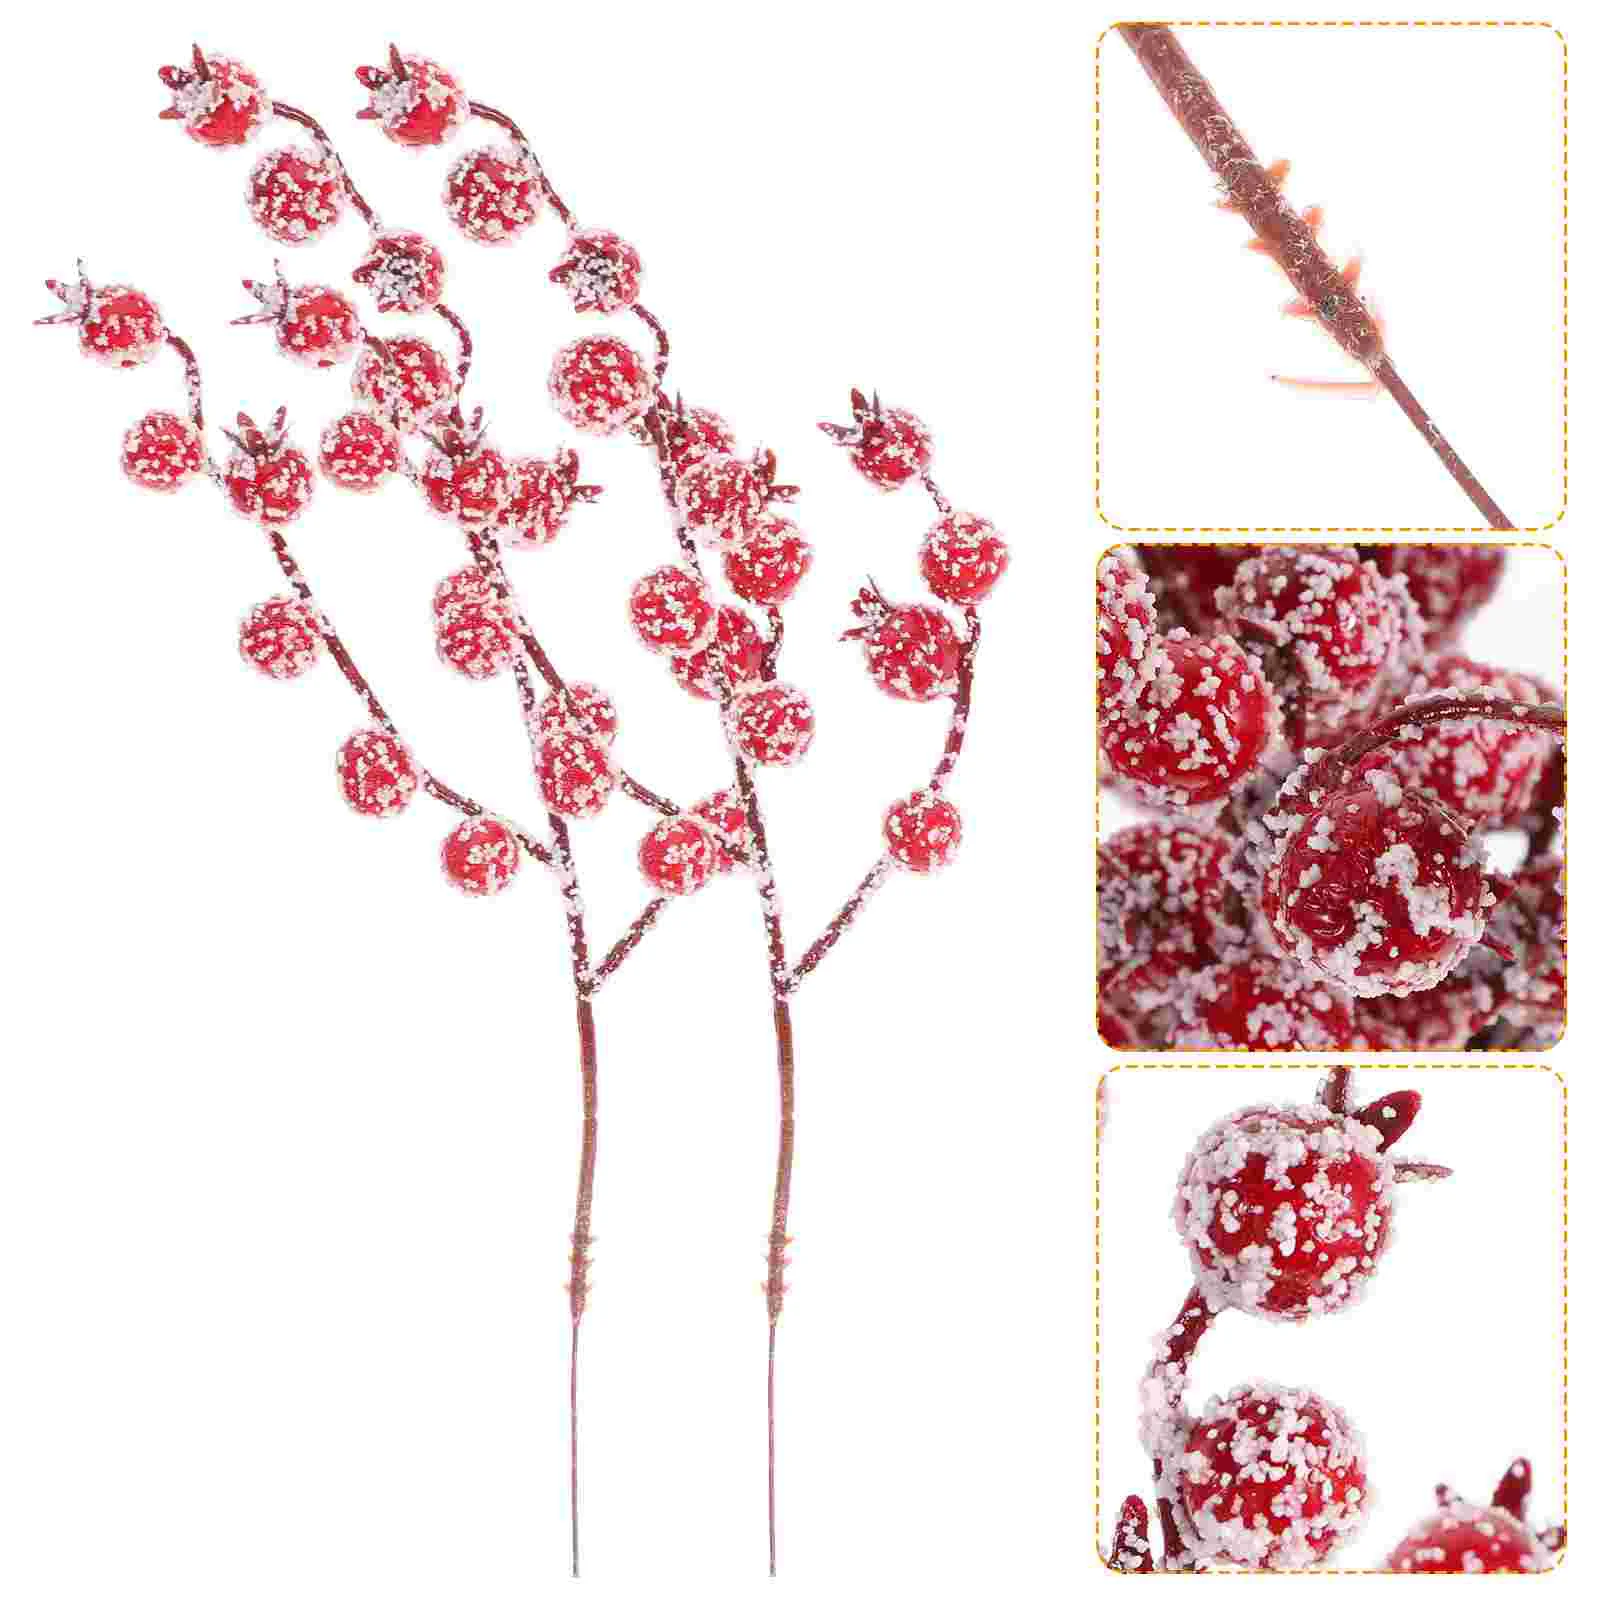 

Berry Christmas Artificial Red Berries Stems Holly Branches Picks Treefake Decor Stem Flower Branch Frosted Flowers Picksnowy